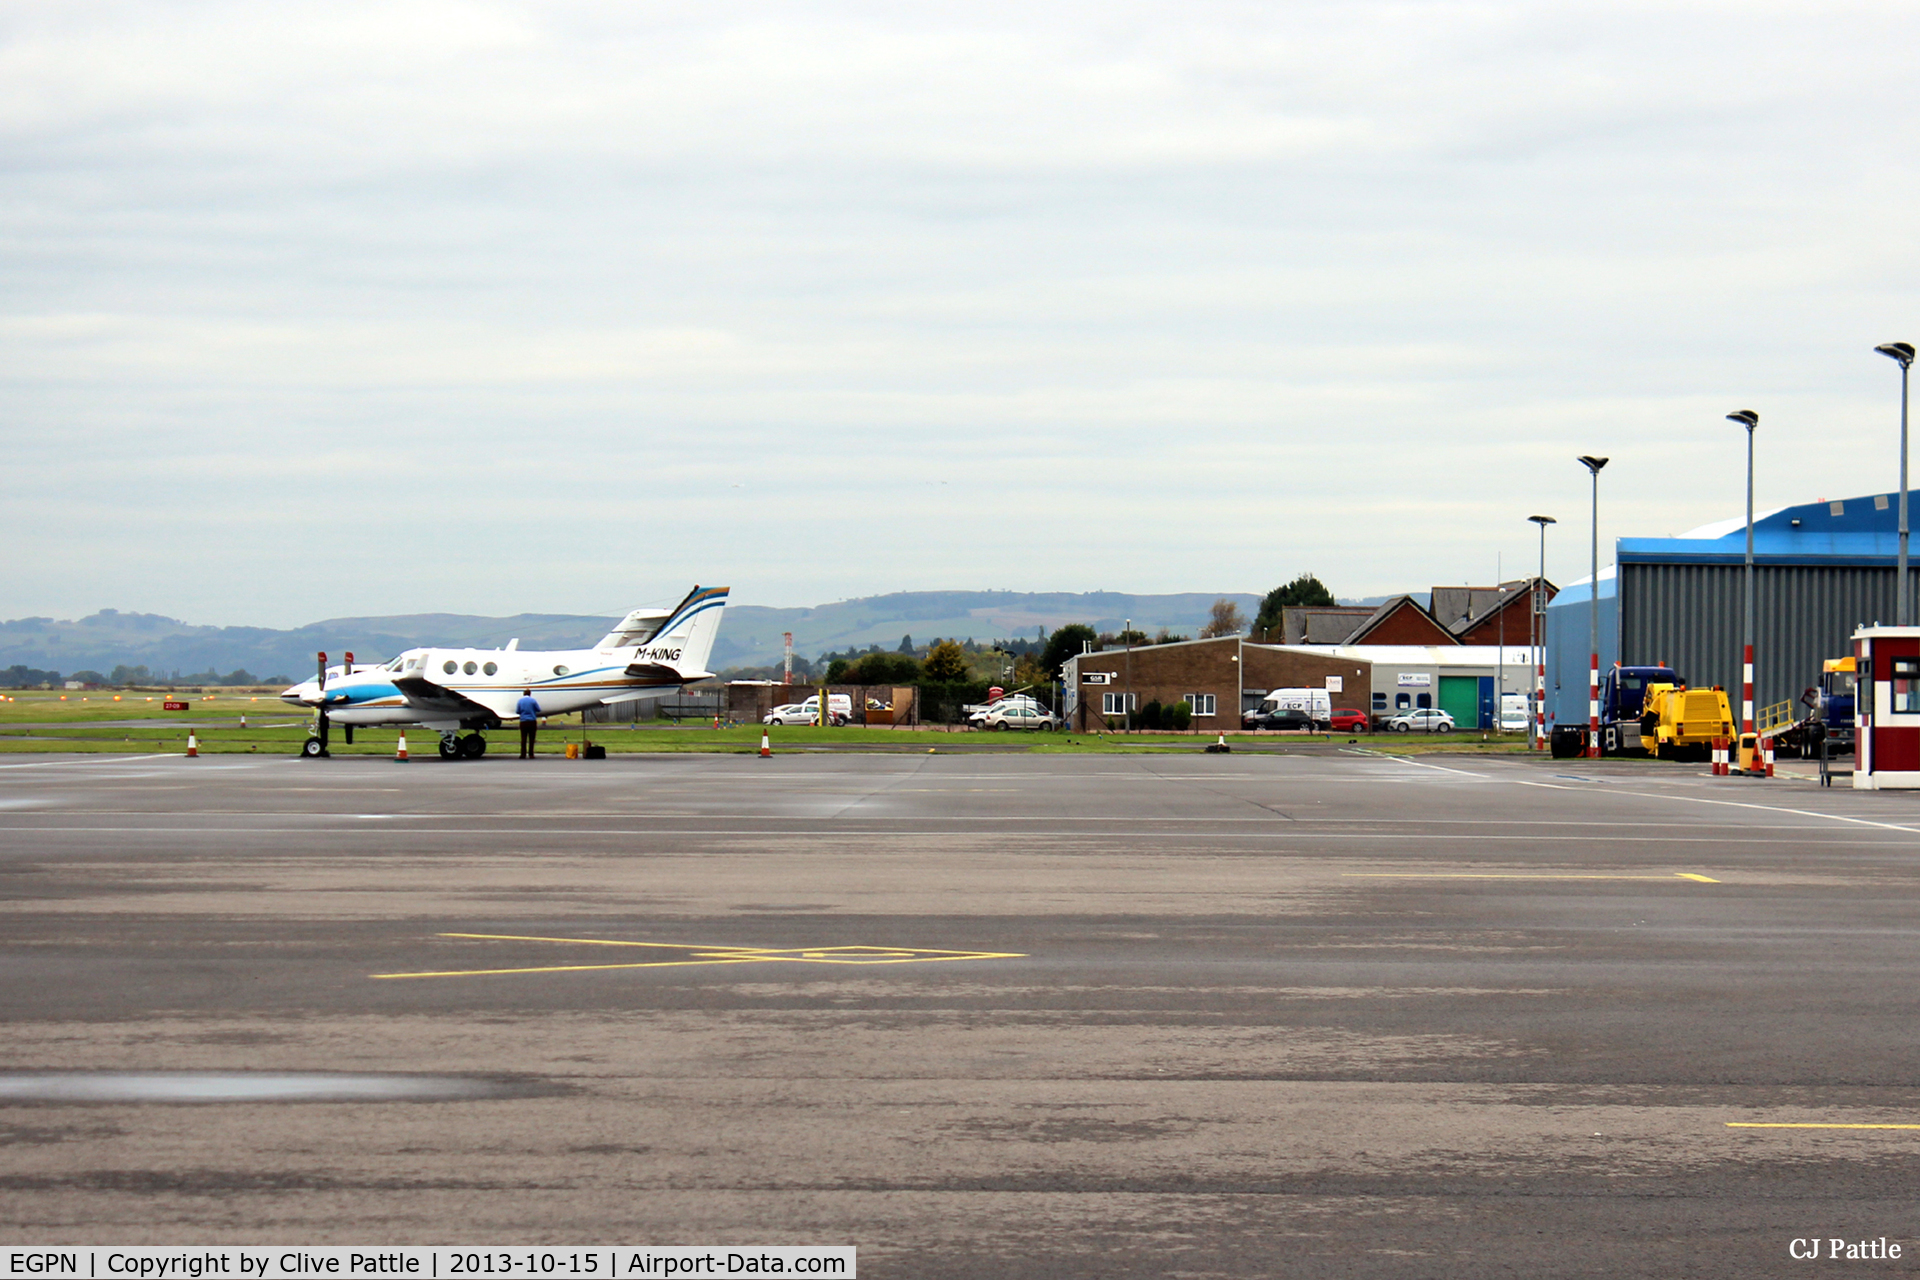 Dundee Airport, Dundee, Scotland United Kingdom (EGPN) - Wide expanse of apron available at Dundee Riverside. In the distance, looking west,  is a visiting M-KING and on the right the Loganair/Flybe maintenance hangar is visible